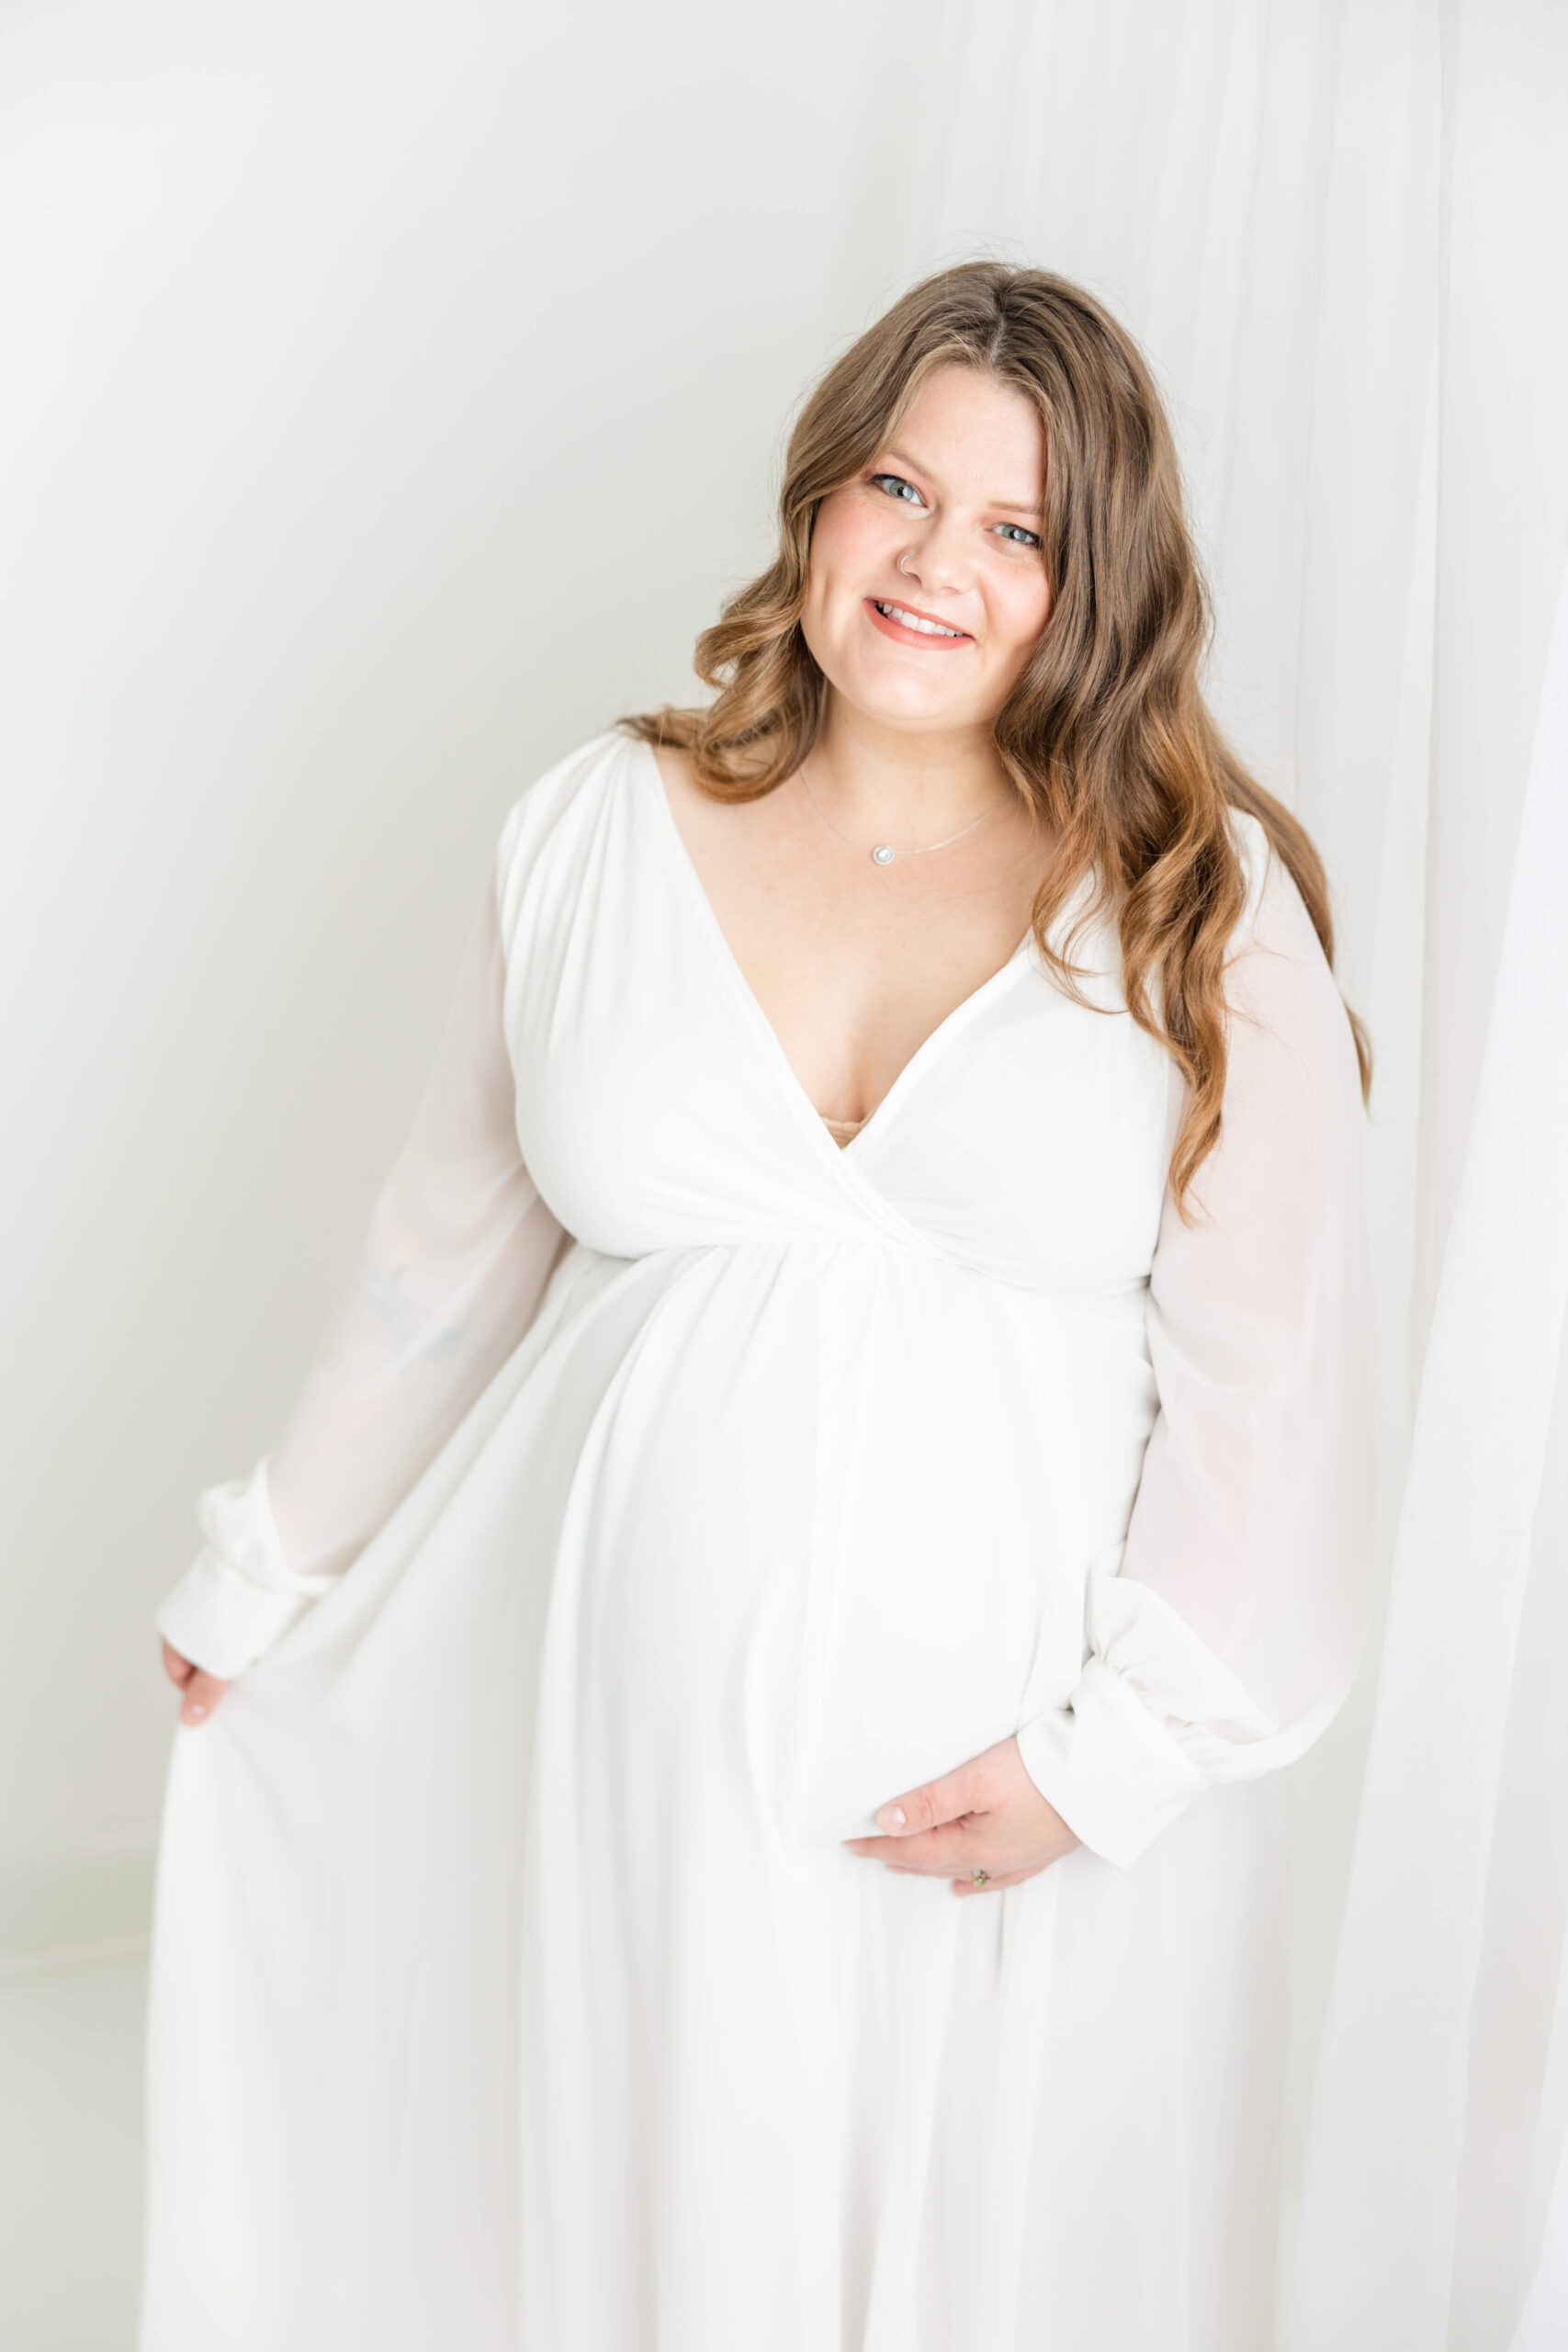 Captured soon-to-be mom wearing a flowing white gown during her maternity session with Molly Berry Photography.